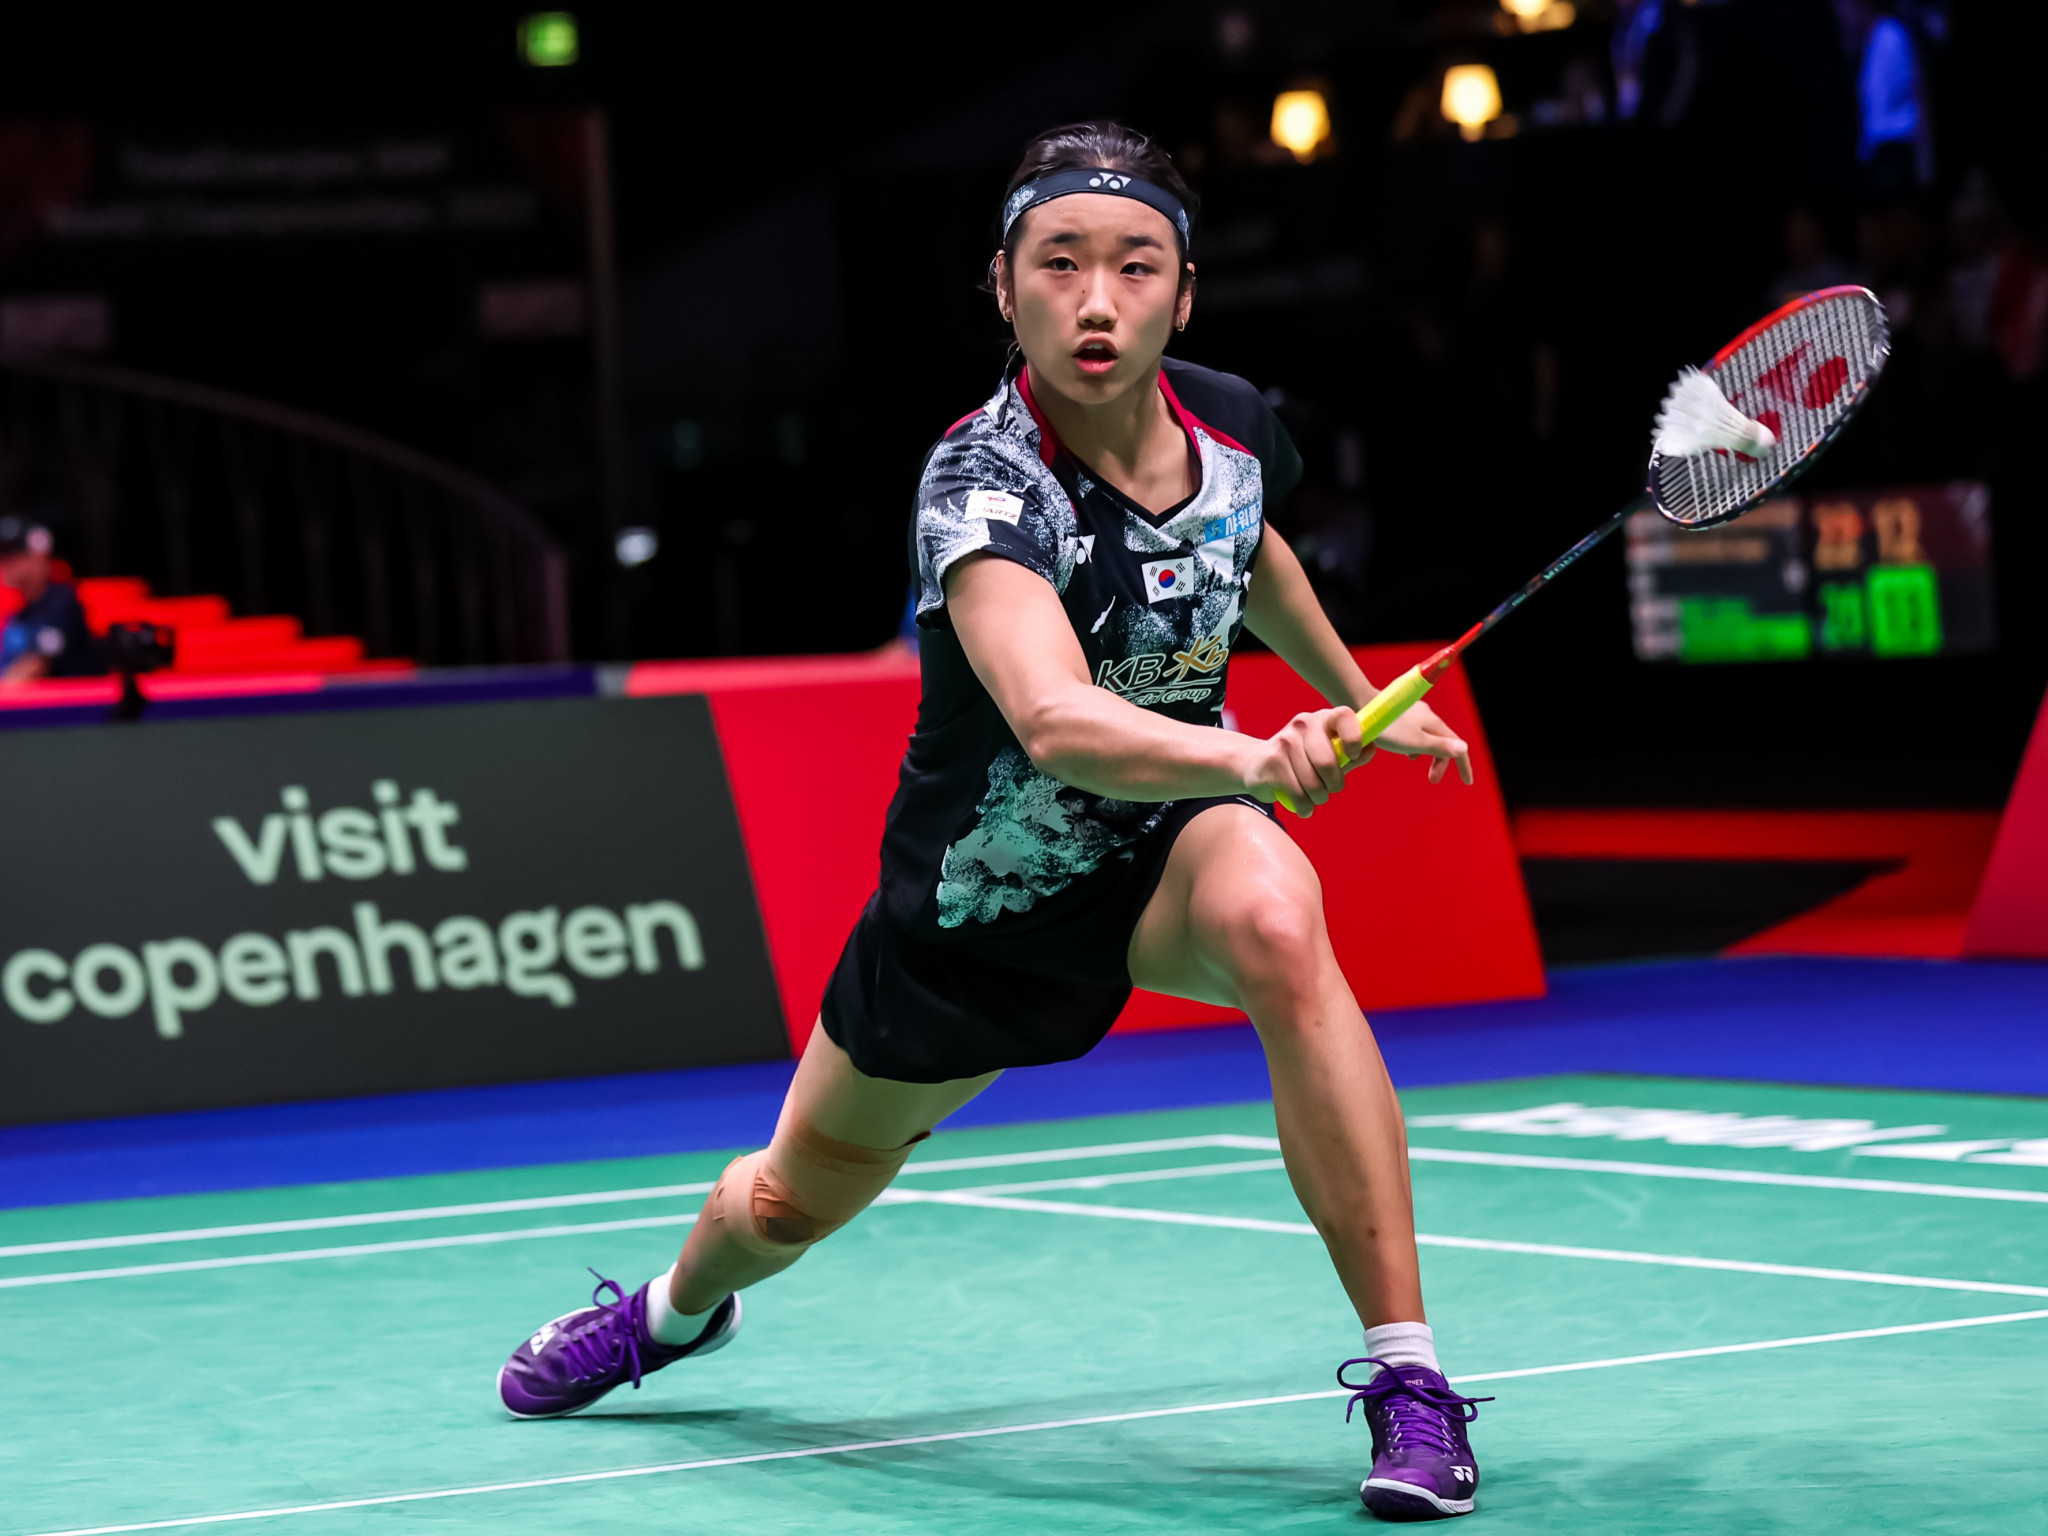 Women's singles top seed An Se-young of South Korea did not have it all her own way in her success against American Beiwen Zhang ©Badmintonphoto